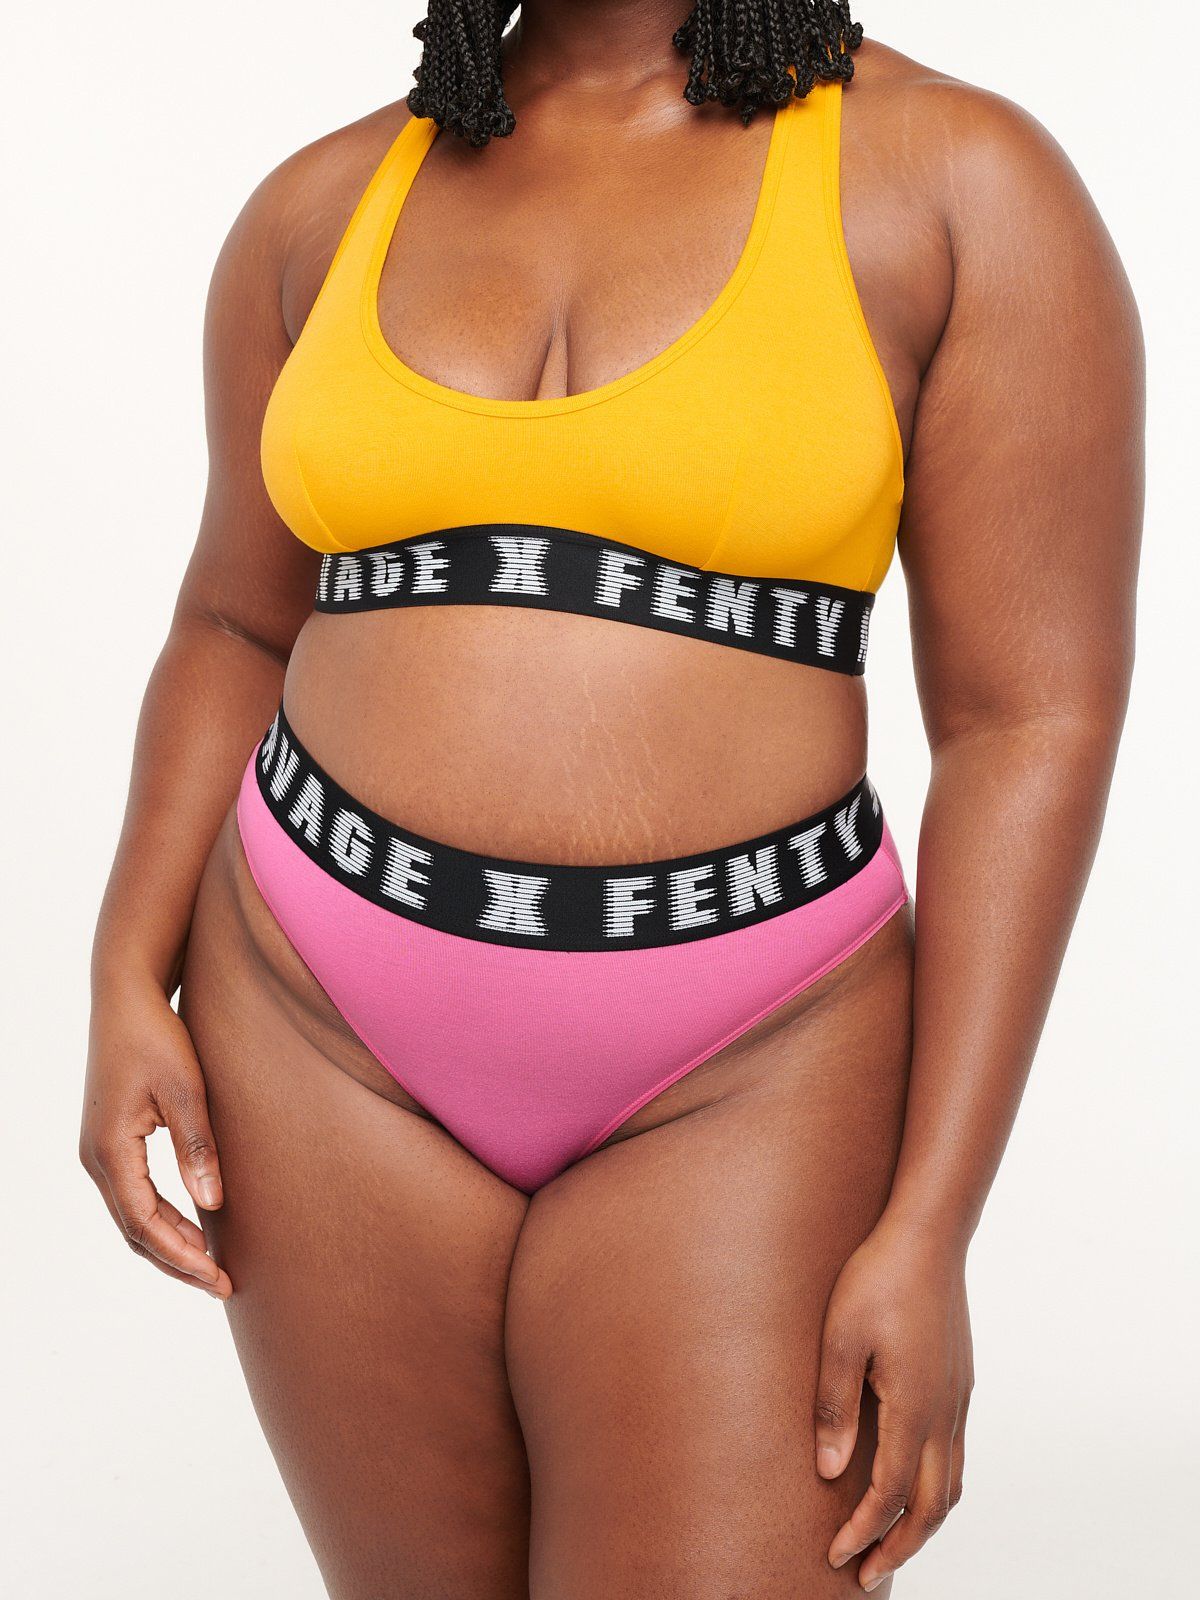 The 11 Best Plus-Size Lingerie Brands, To Reviews